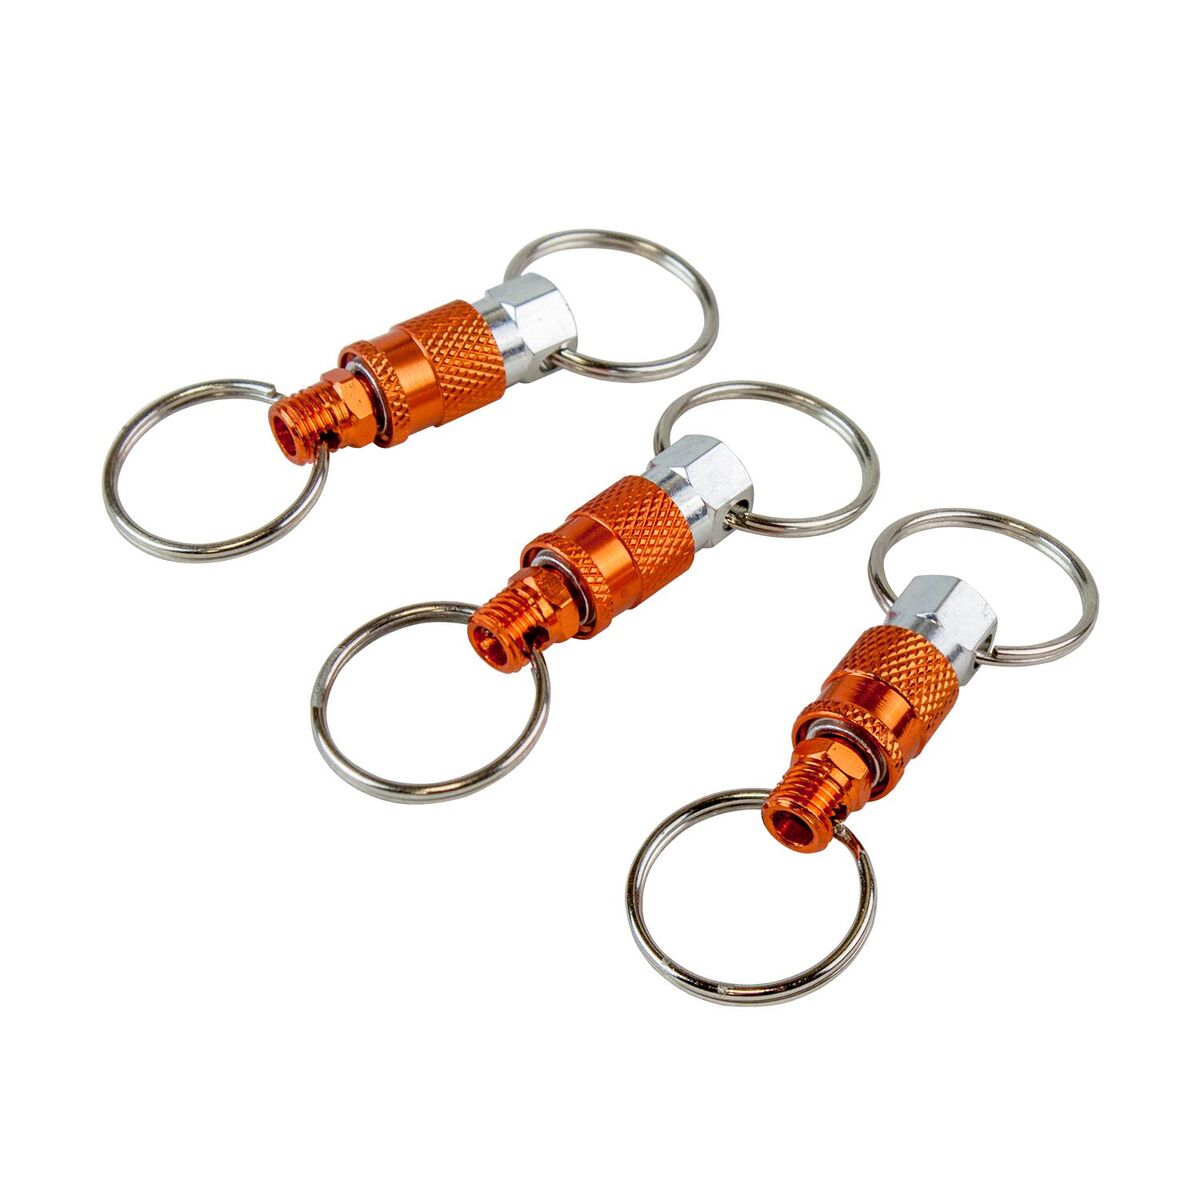 Picture of Freeman KEYQC3 Pull Apart Coupler Keychain with 2 Split Rings, 3 Pack